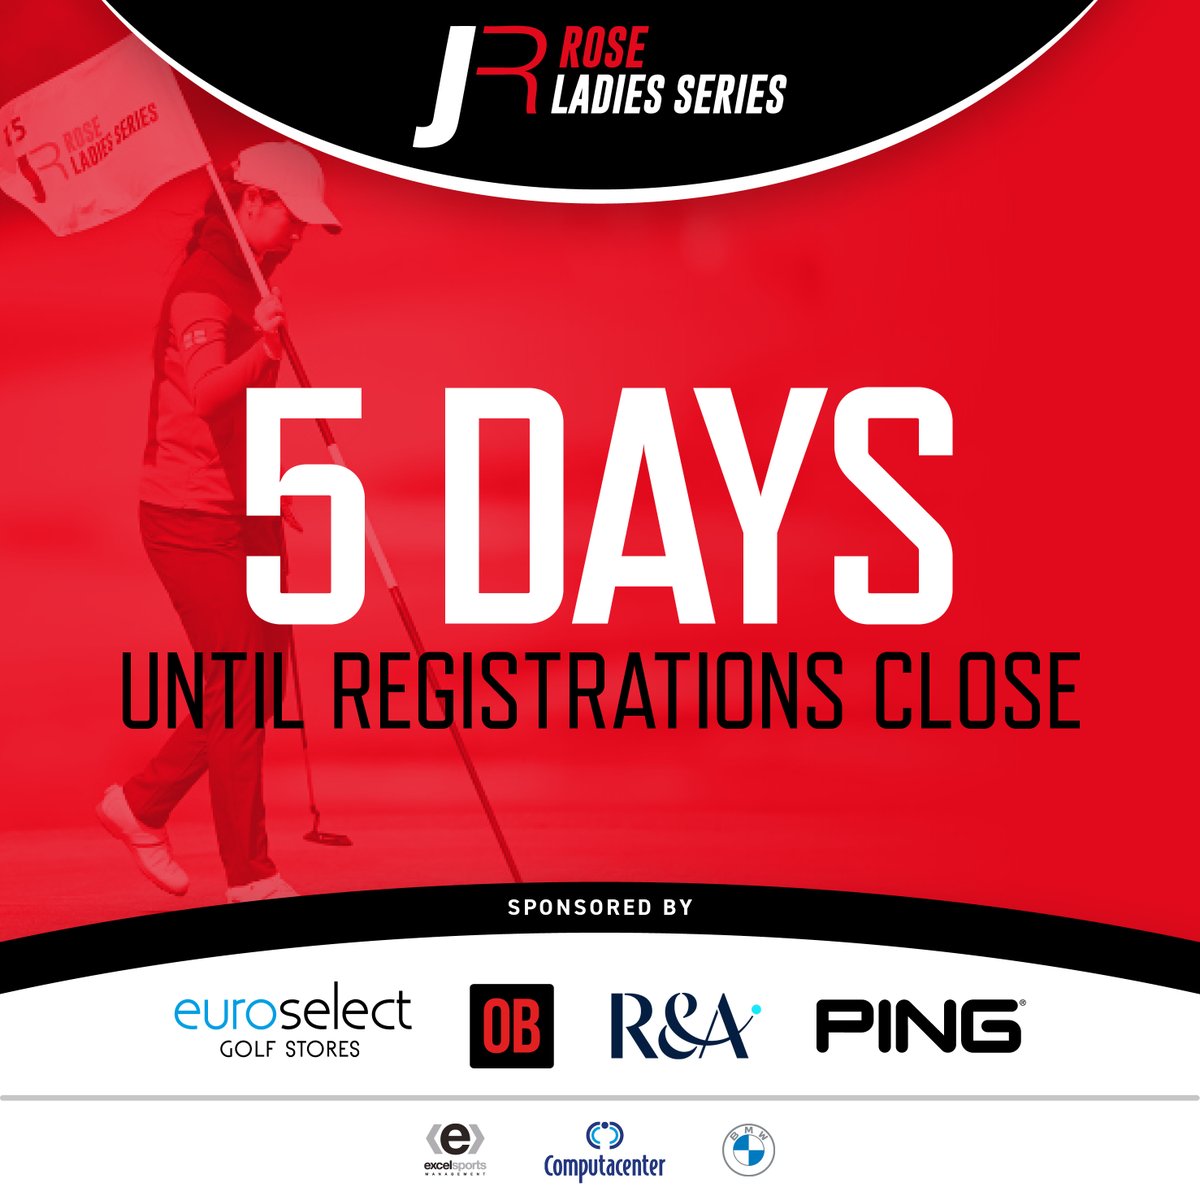 The countdown is on!⏰Just 5 days until registrations close for the 2024 Rose Ladies Series. Follow the link in our bio so you don't miss your chance to enter. #RoseLadiesSeries